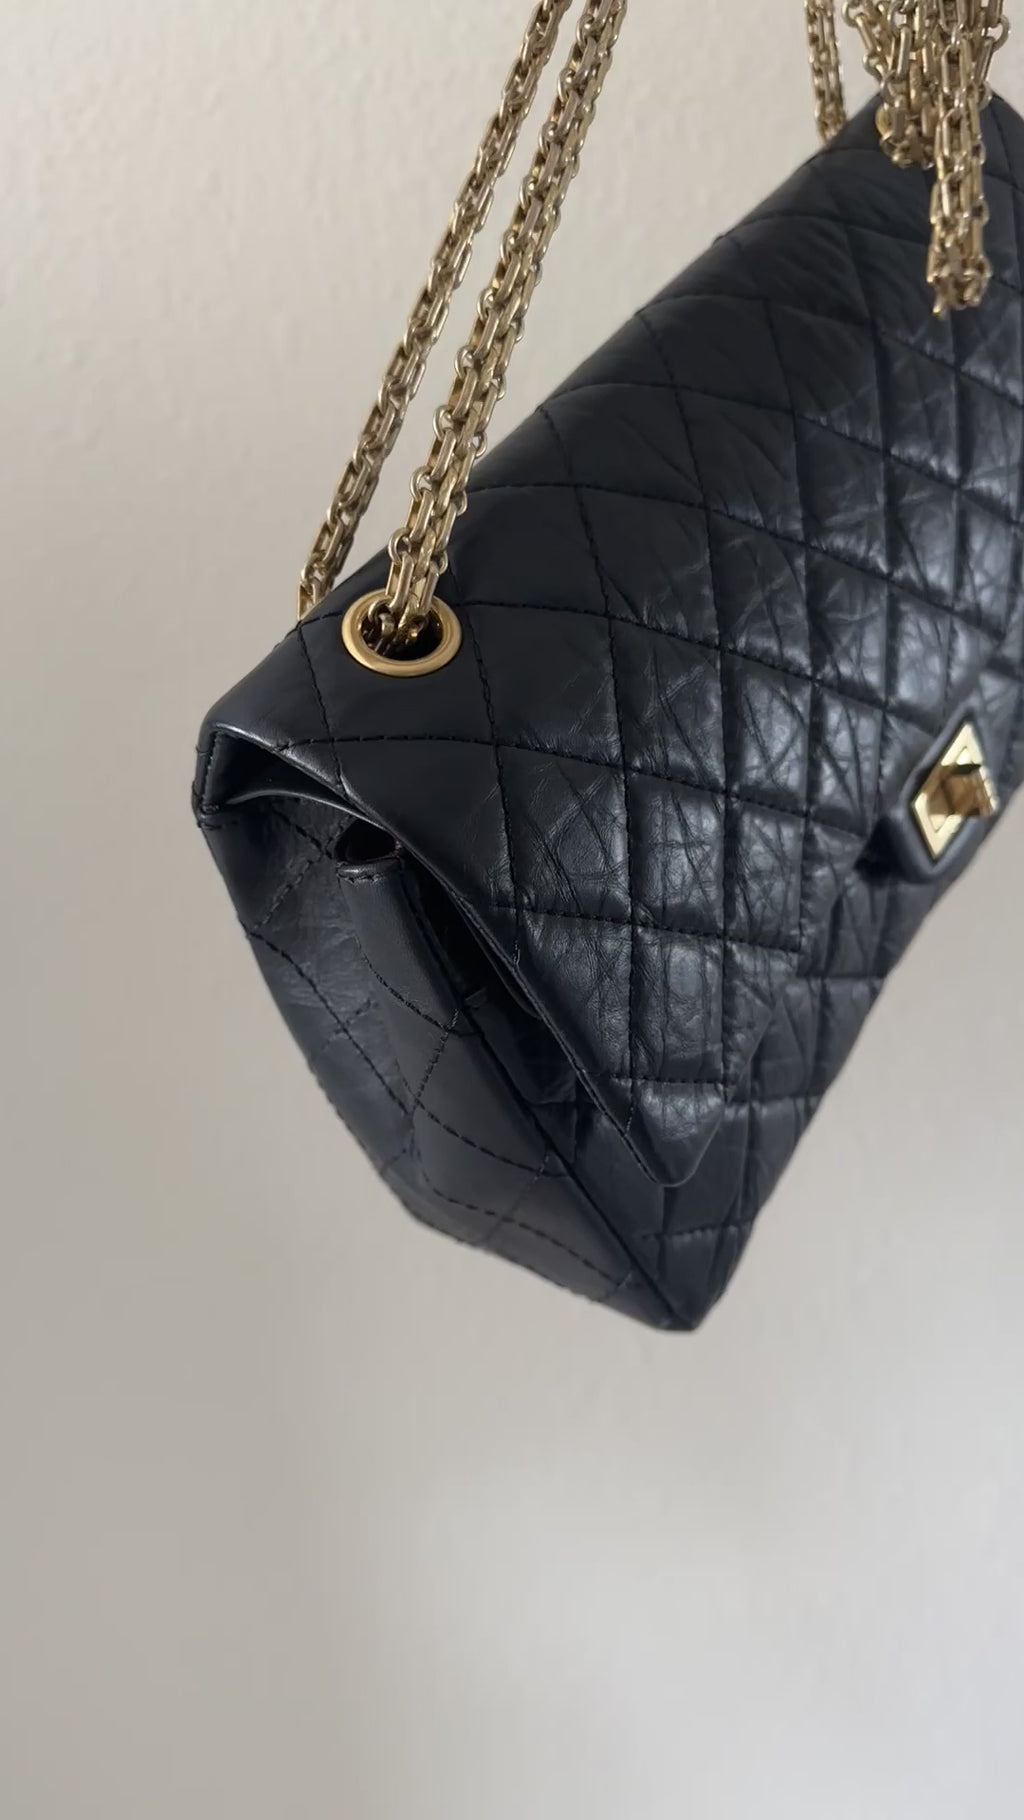 Where to buy the Chanel 2.55 and Chanel Flap Bag